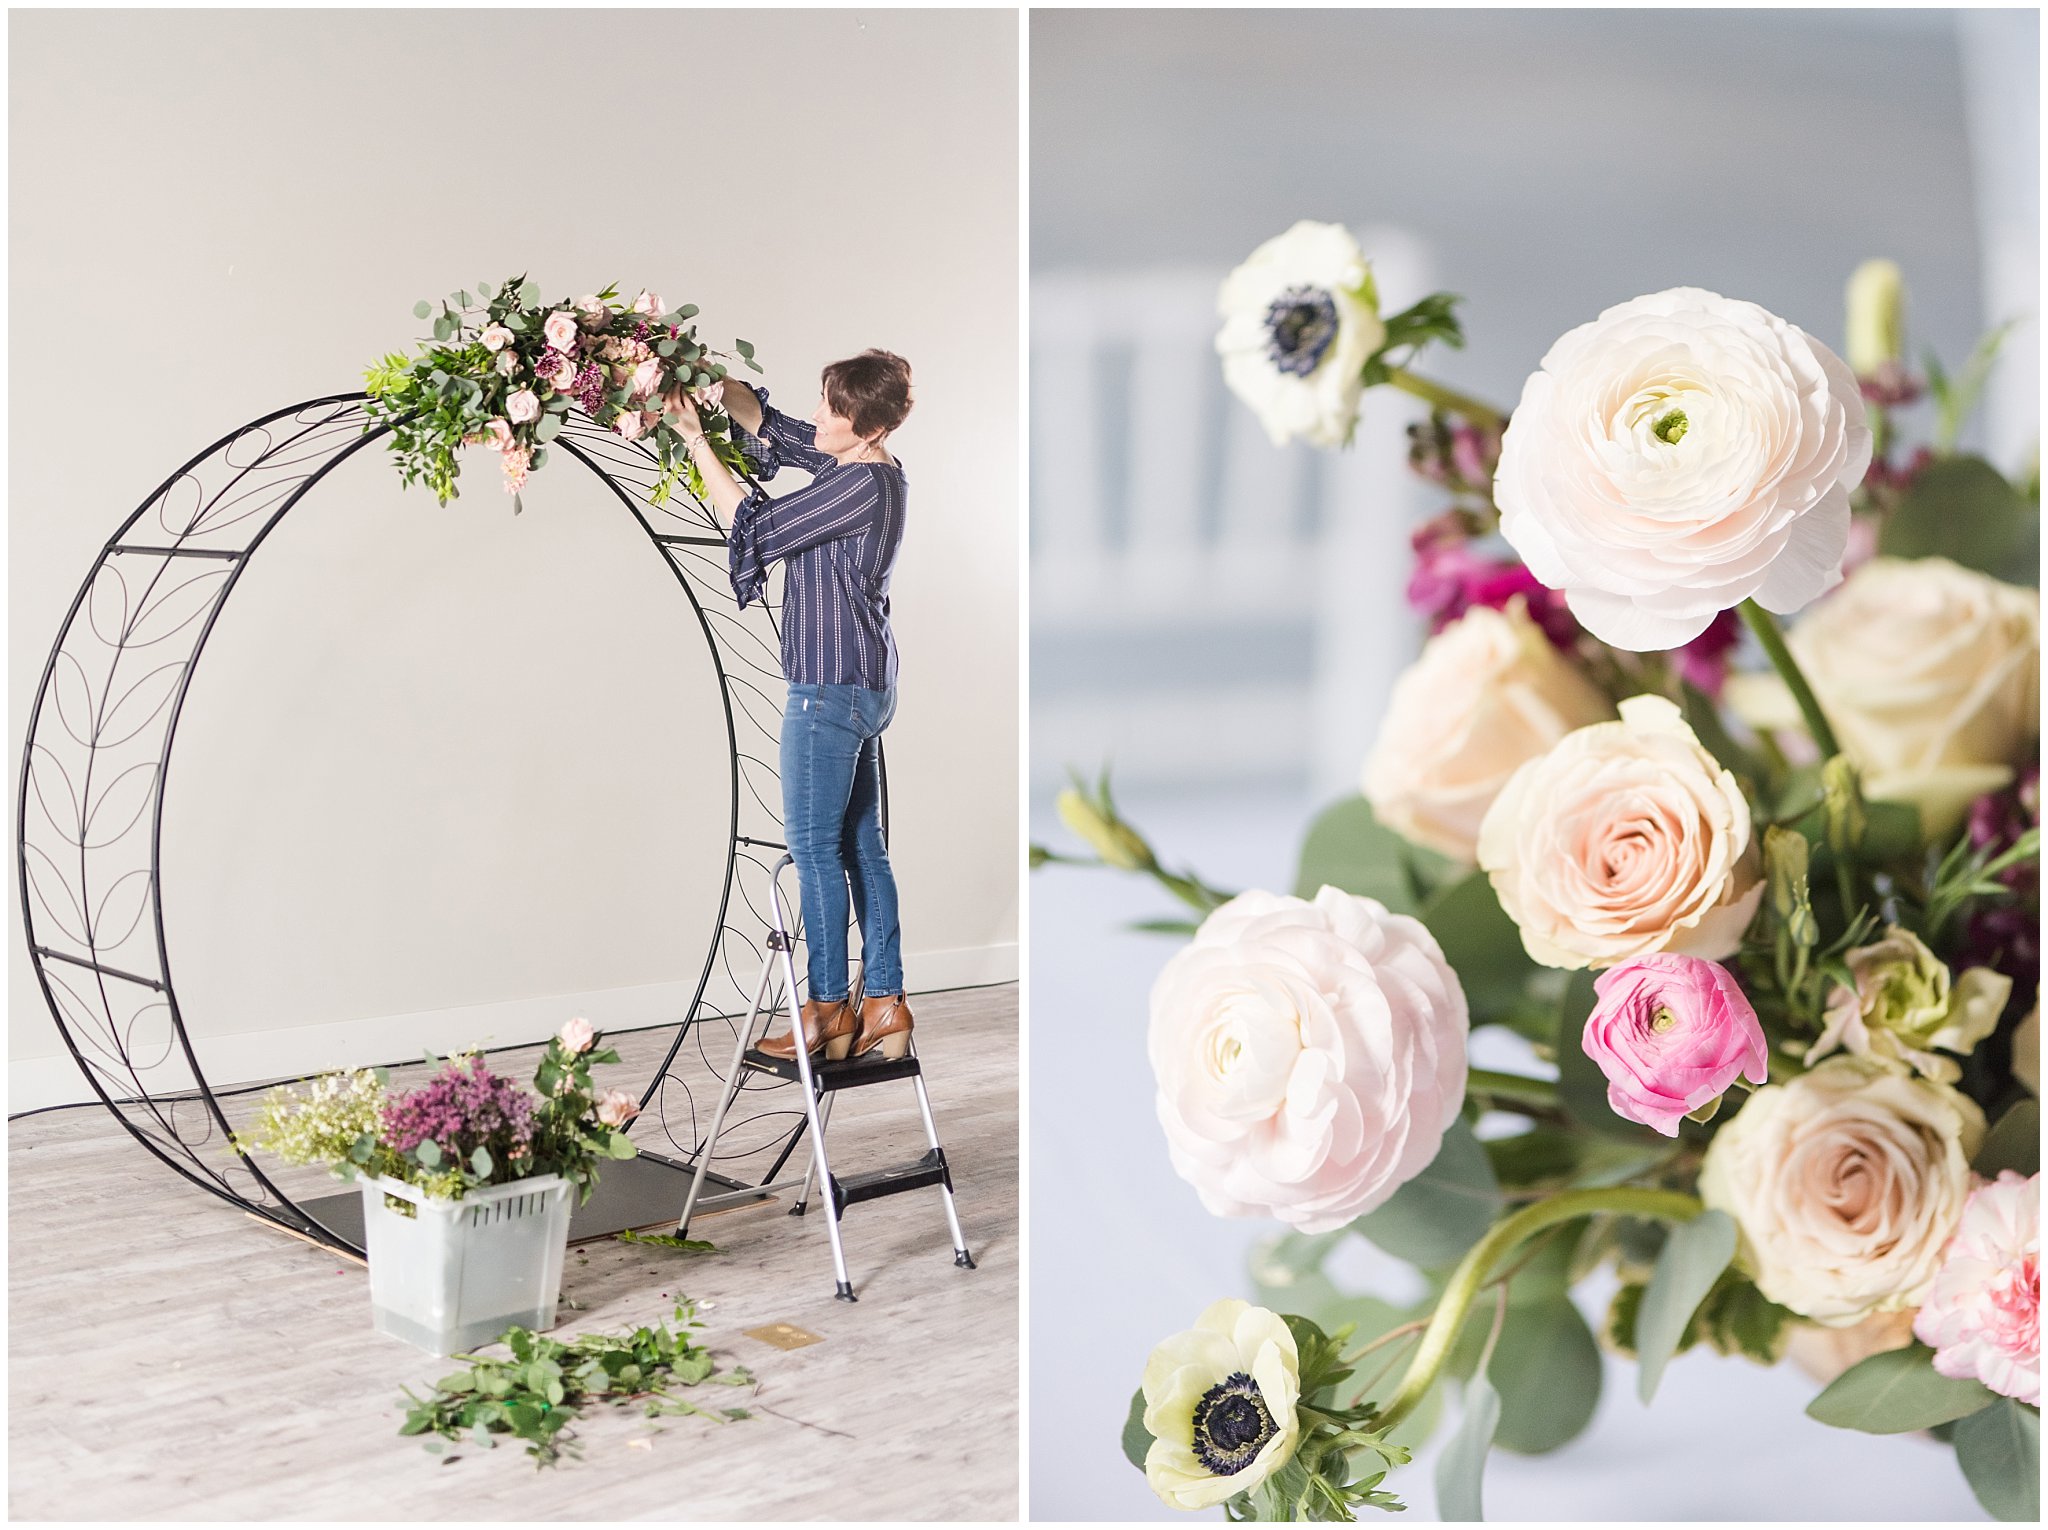 Florist setting up floral arch | 5 Tips to Find the Wedding Vendors That Are Right For You | Utah Wedding Photographers | Jessie and Dallin Photography